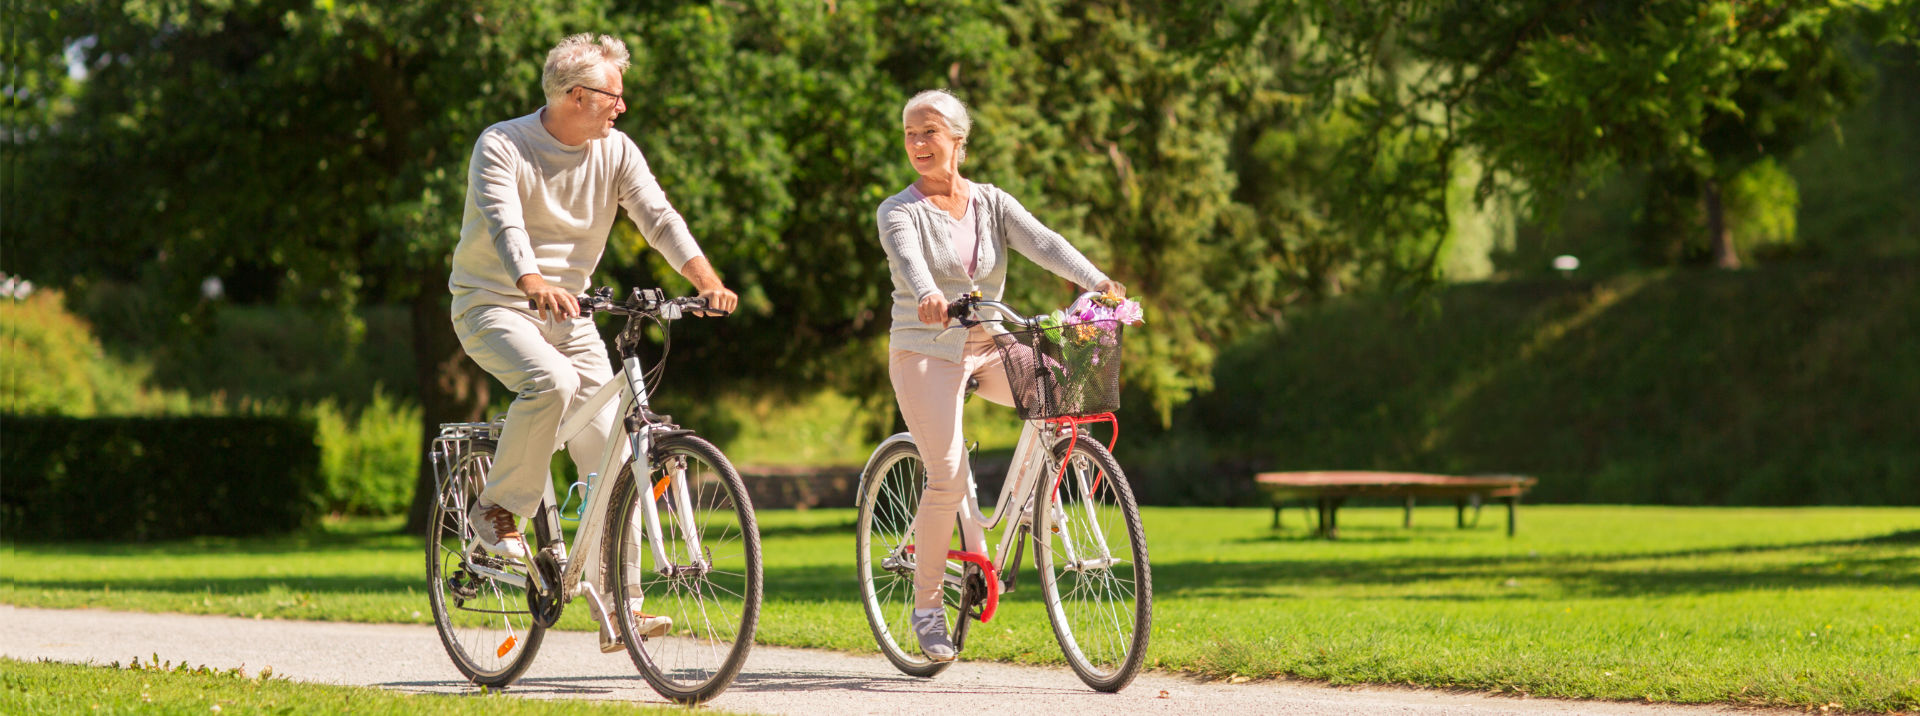 Traditional & Roth IRA Accounts - Elderly man & woman riding bikes in a park | Ozark Bank